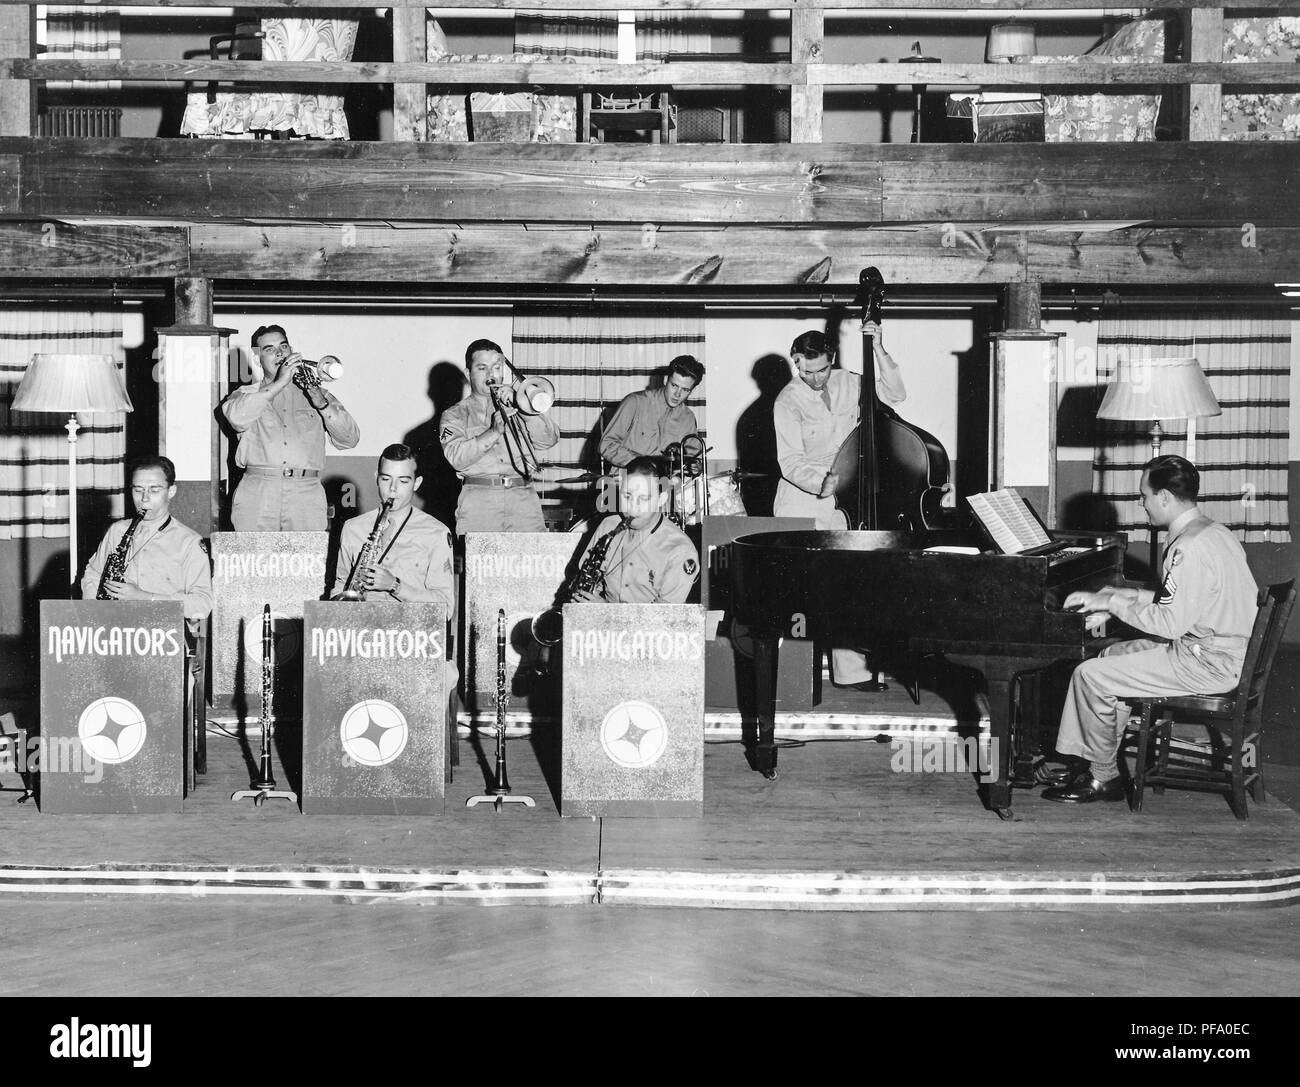 Black and white photograph, showing eight male members of the 'Navigators' band, wearing military clothes, sitting and standing on a low dais, with a wooden gallery overhead, and playing a variety of instruments, including horns, saxophone, bass, and piano, with a winged symbol visible on several musicians' sleeves suggesting an Air Force affiliation, likely photographed in Ohio, during the 1940s, 1945. () Stock Photo